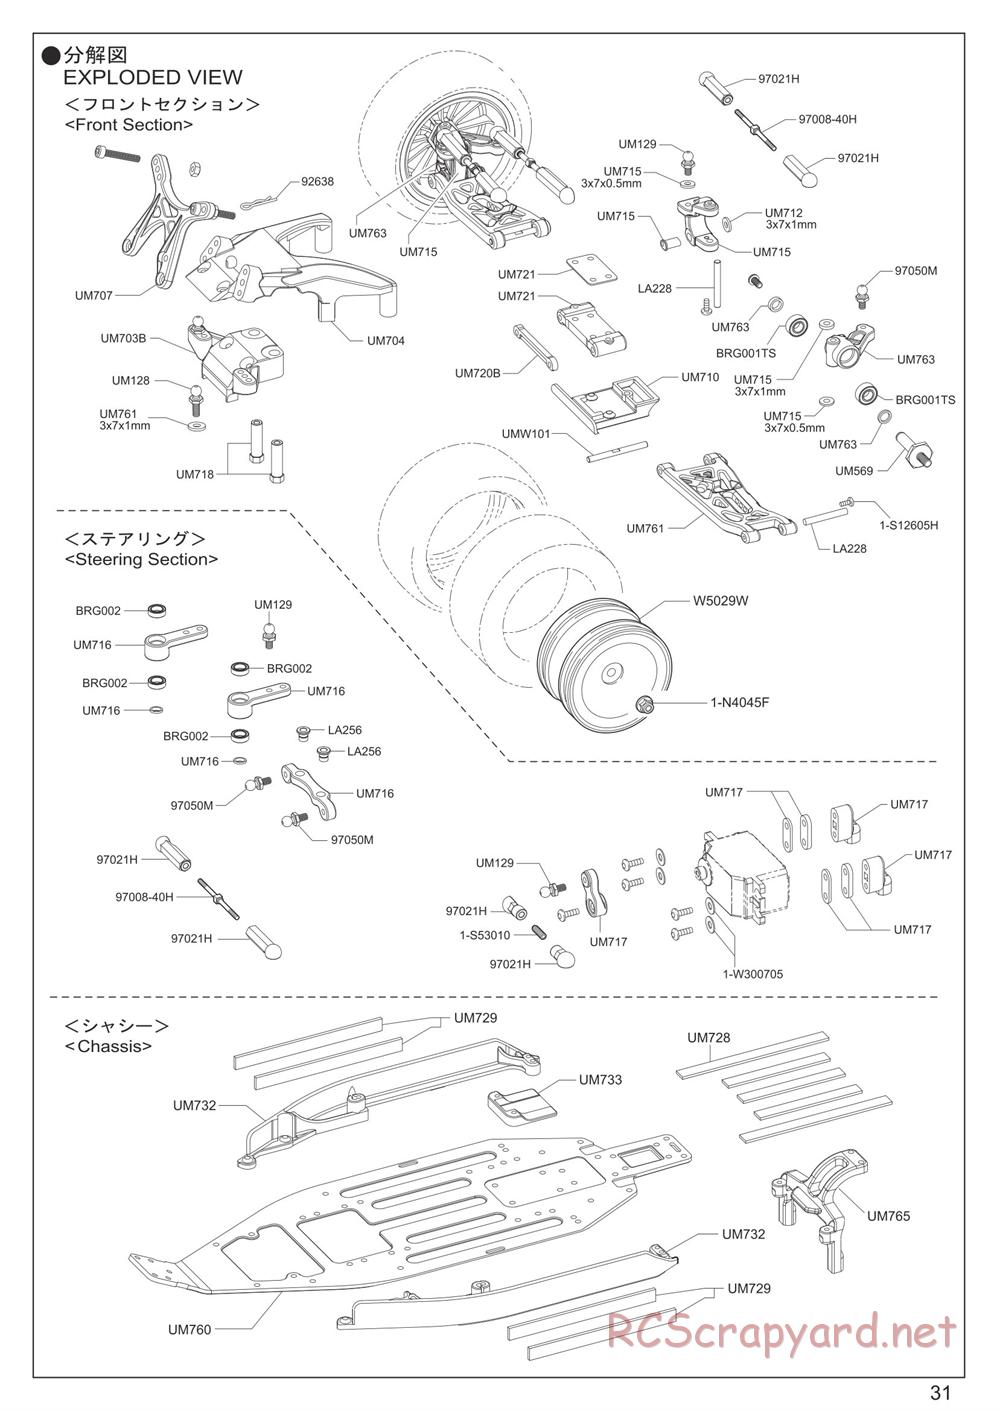 Kyosho - Ultima RB7 - Exploded Views - Page 1